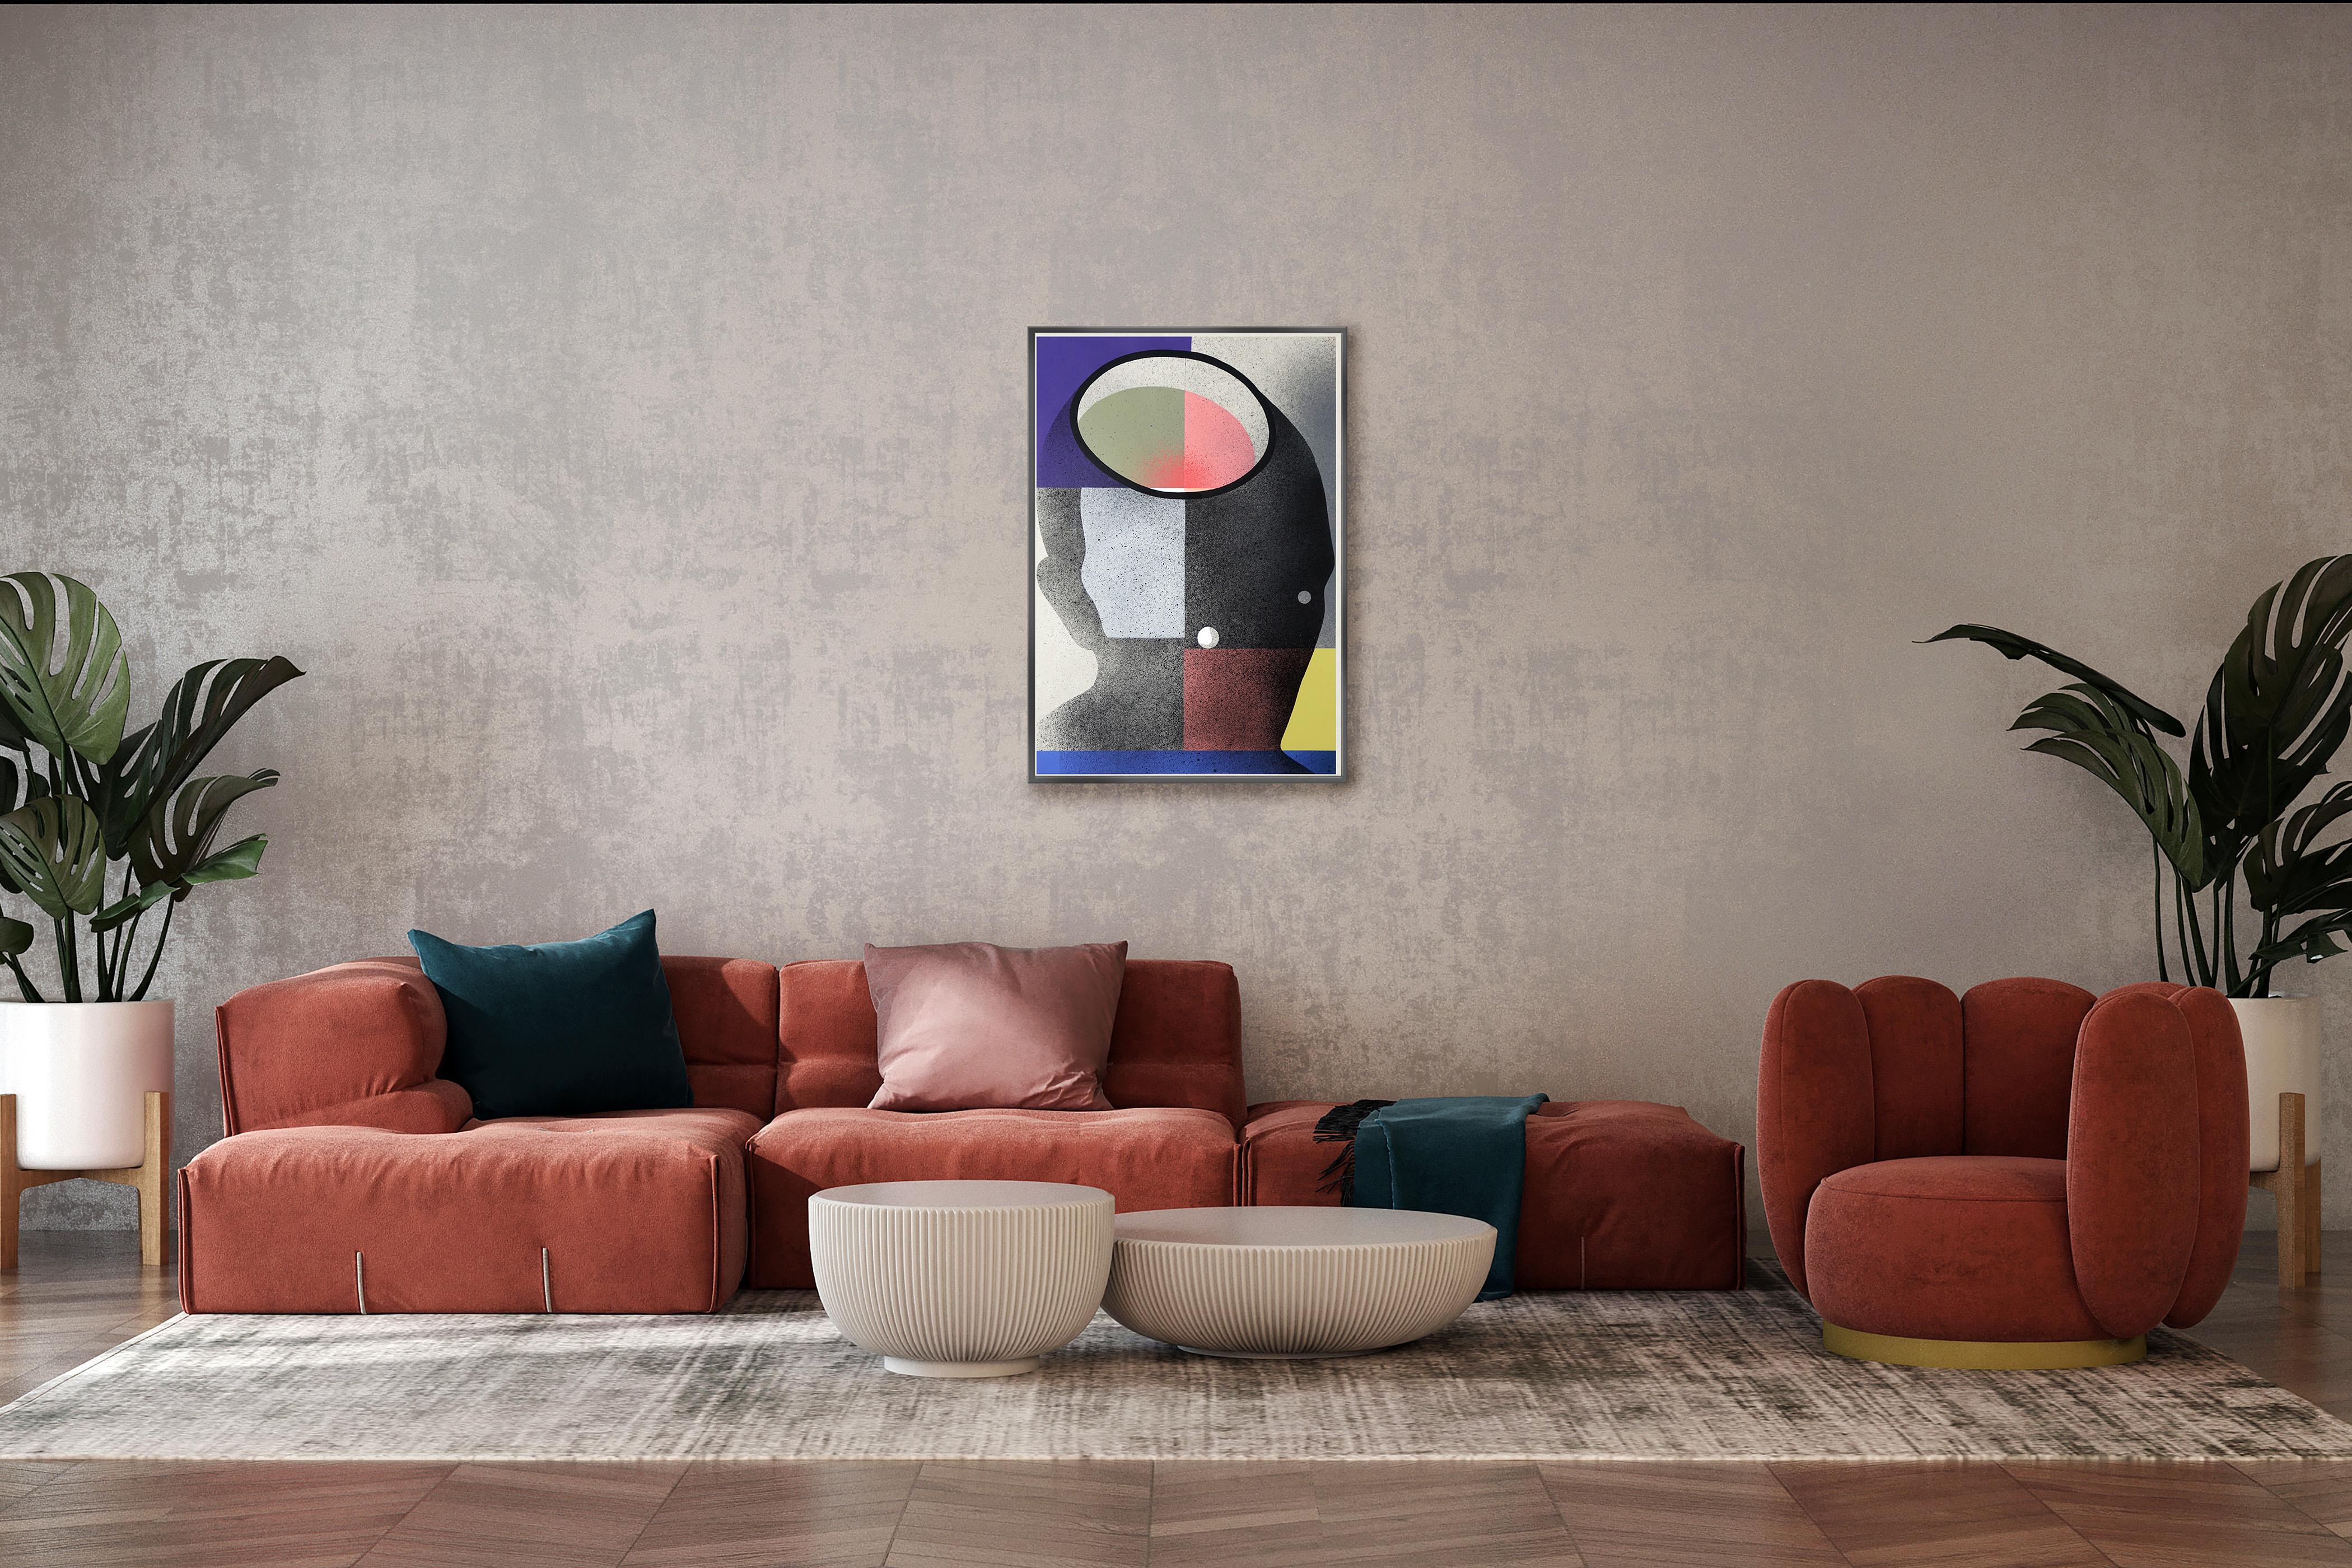 Indoors, Figurative Painting Portrait in Black, Square Shapes in Yellow & Pink For Sale 1